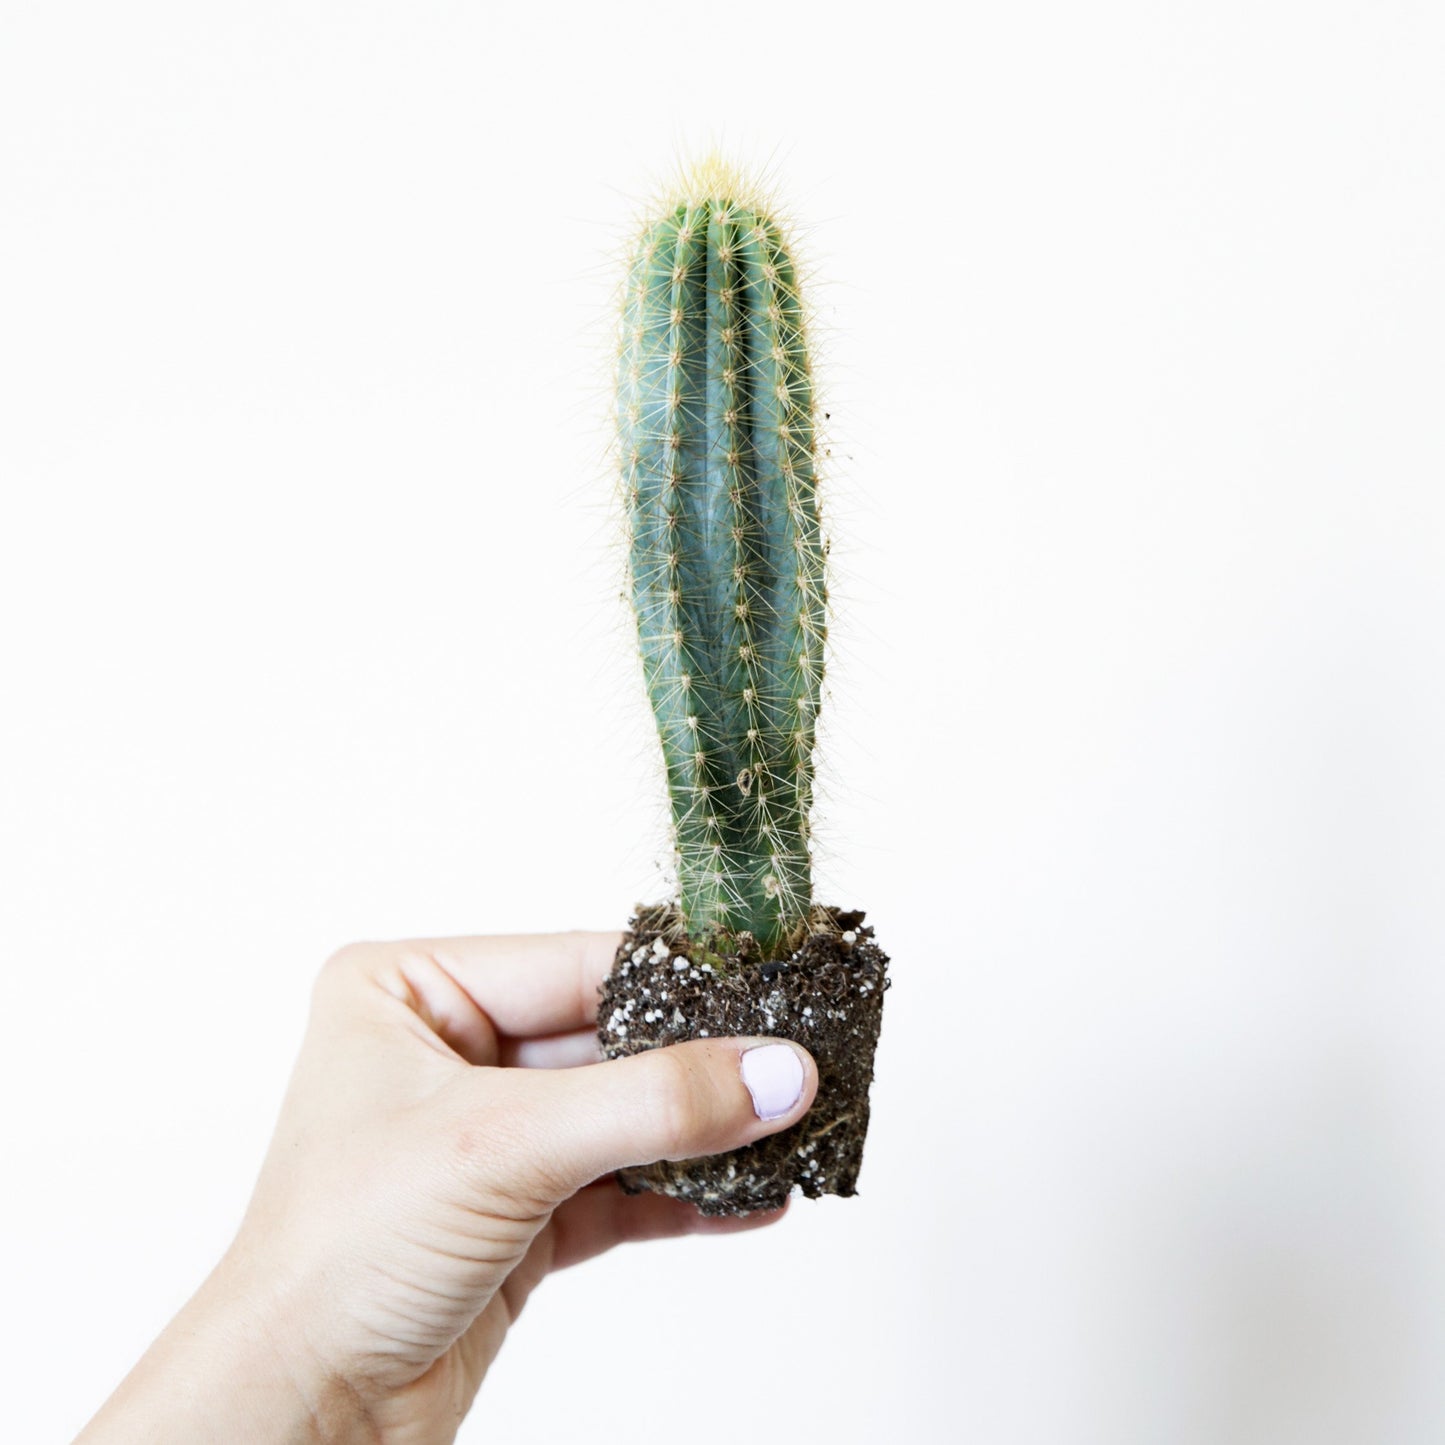 On a white background is a Blue Candle Cactus being held up by a models hands.